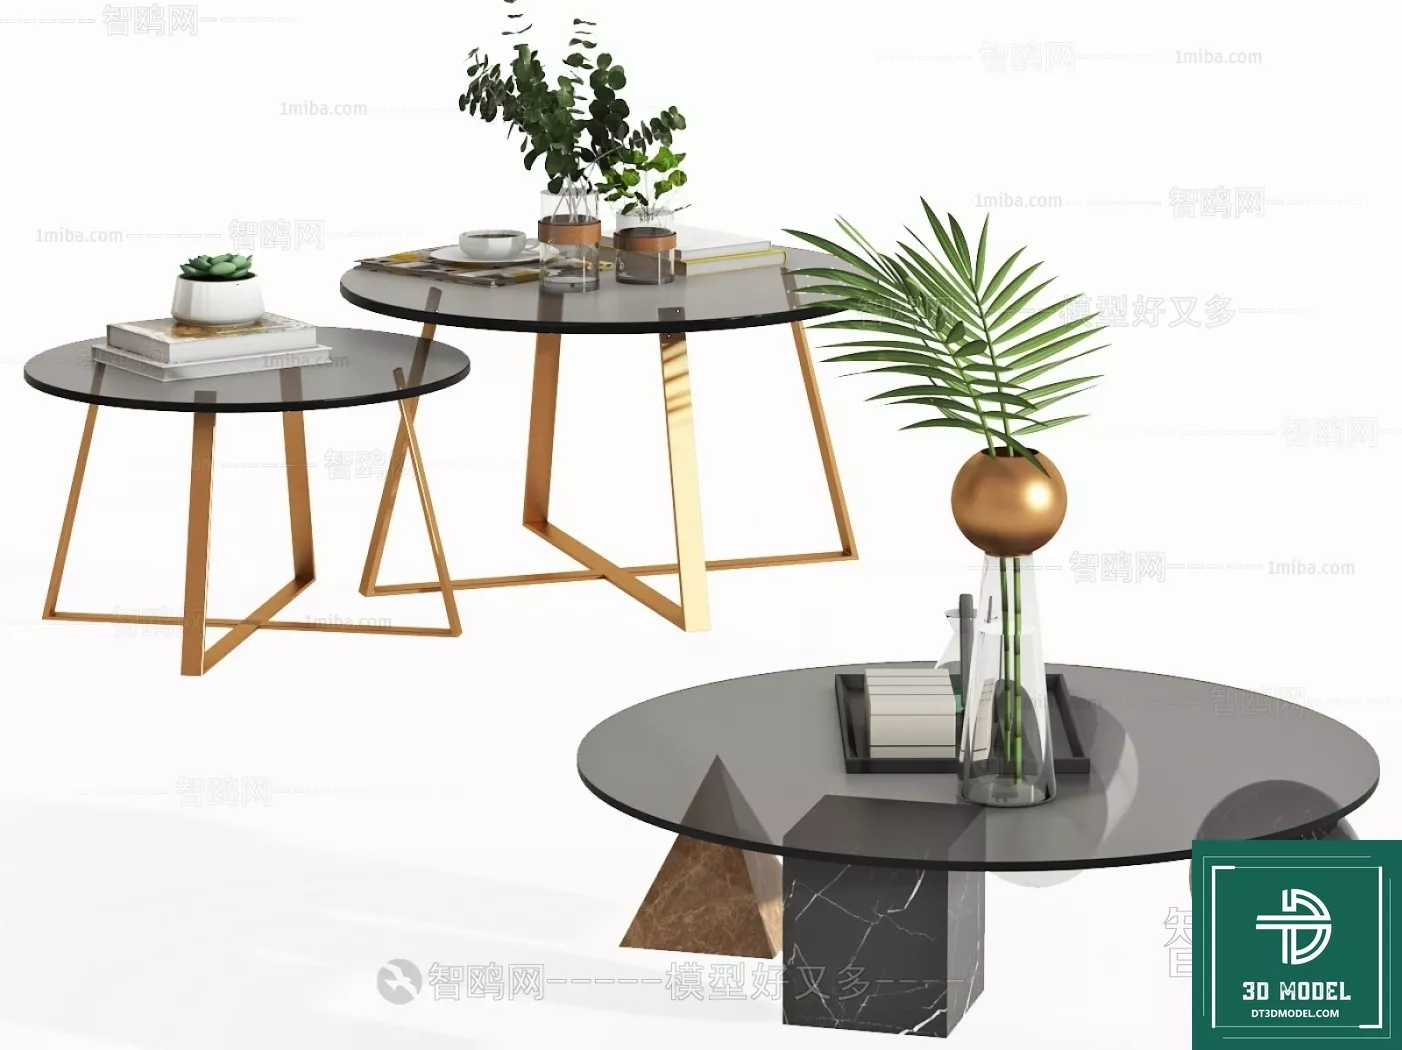 MODERN TEA TABLE - SKETCHUP 3D MODEL - VRAY OR ENSCAPE - ID14979